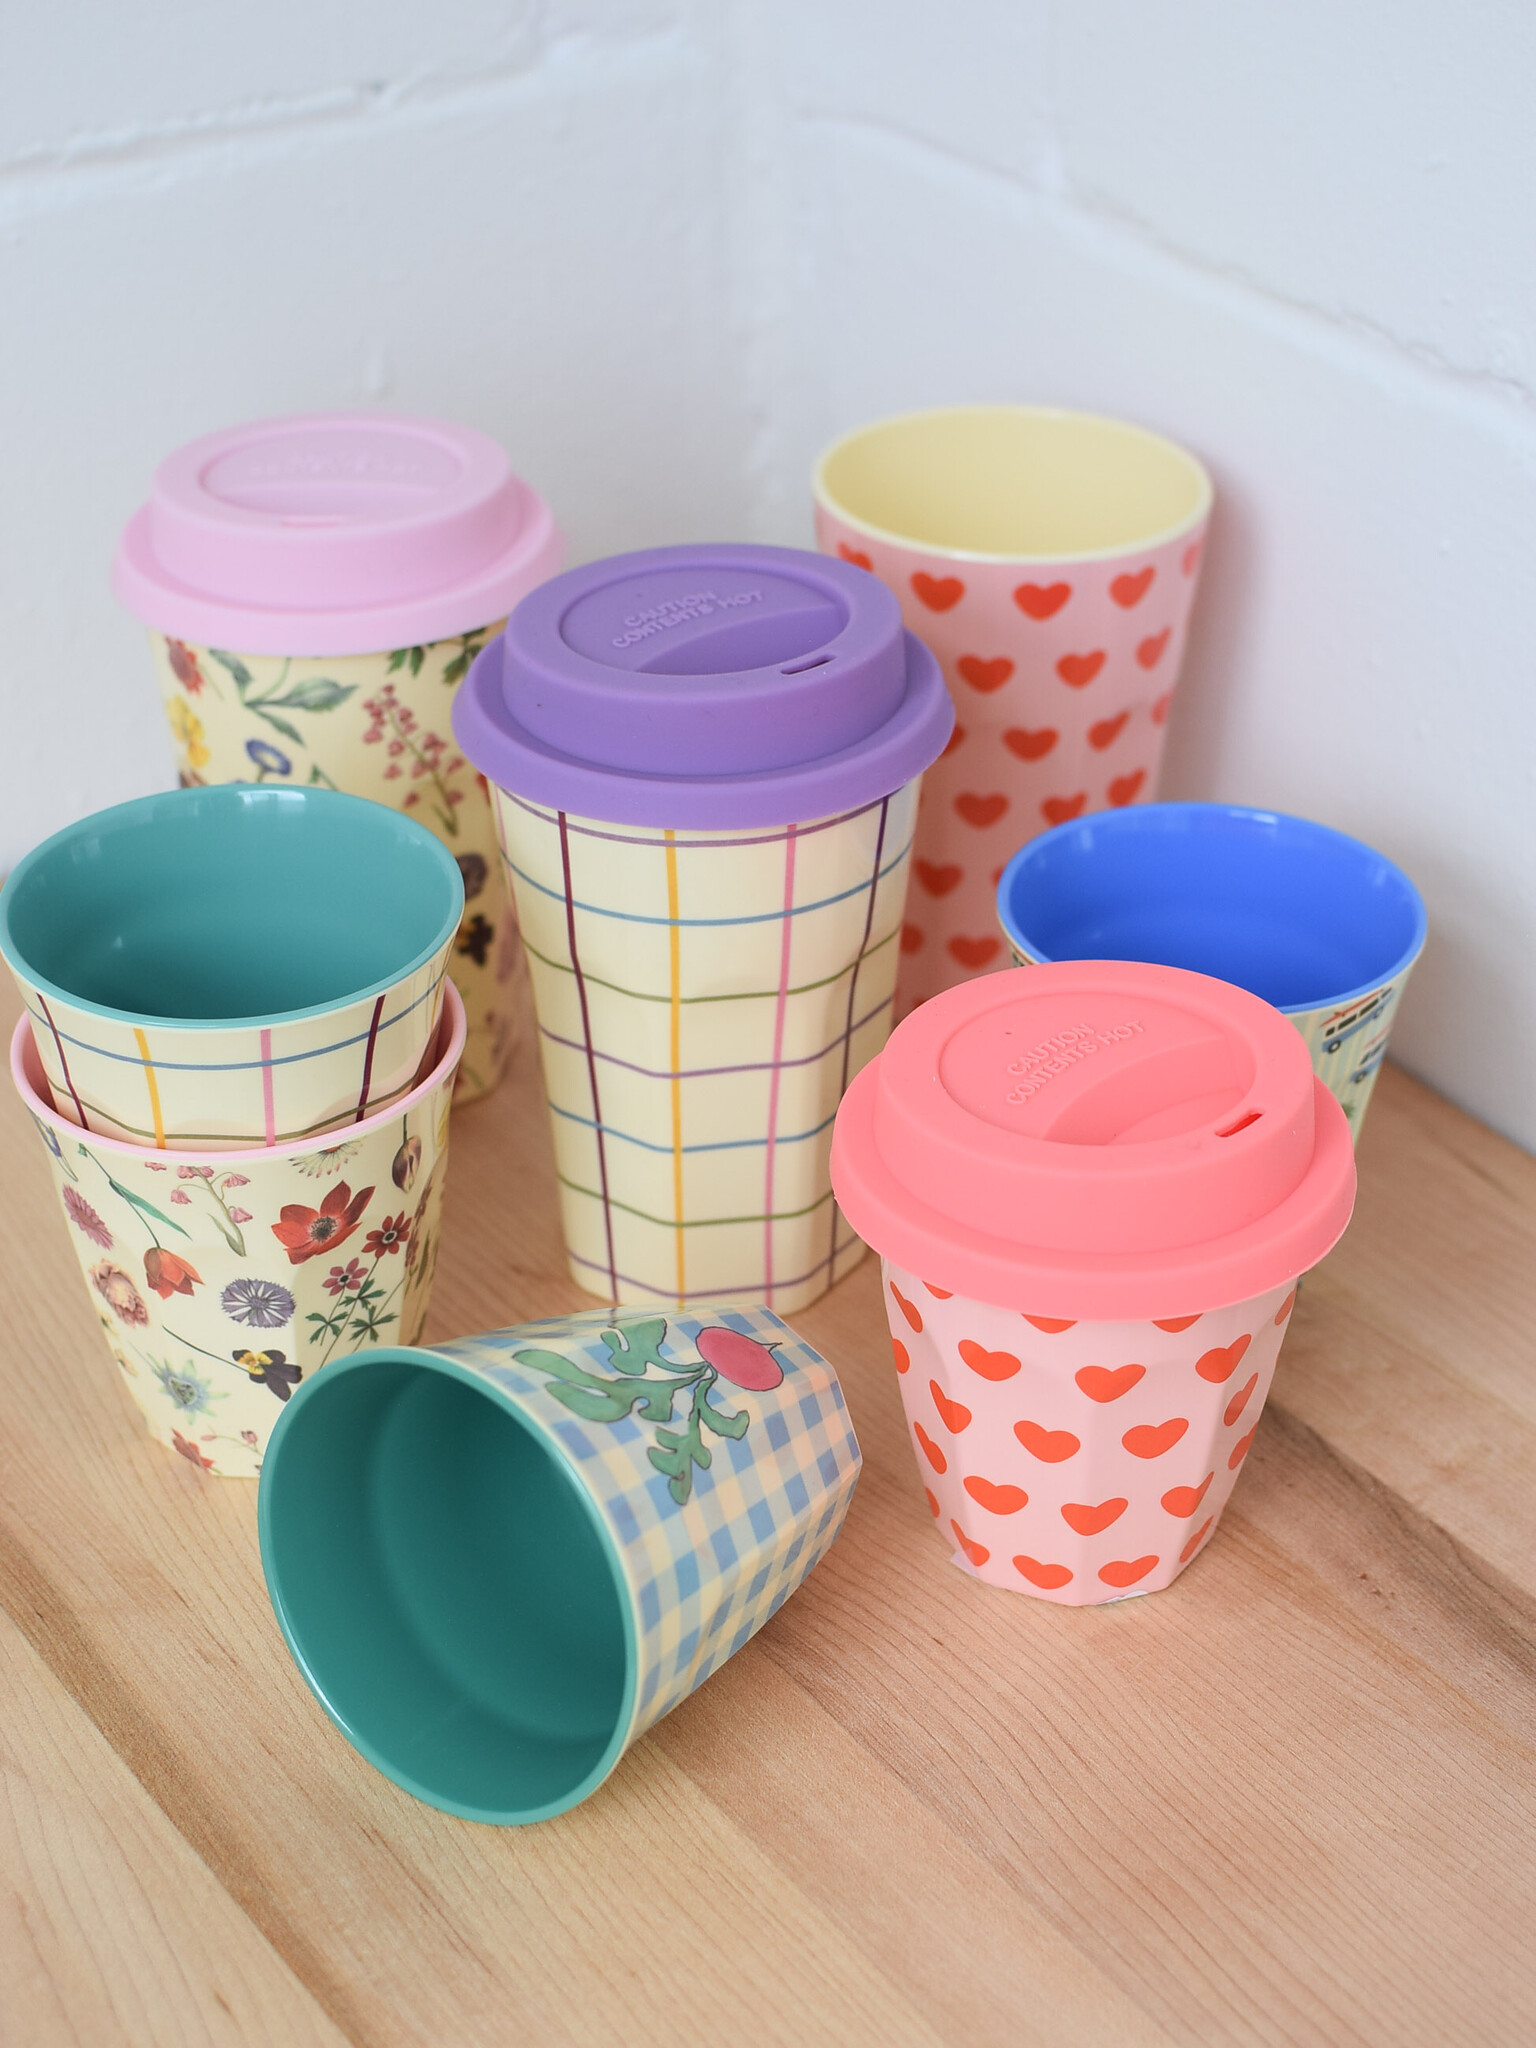 Melamine cup - Sweet hearts